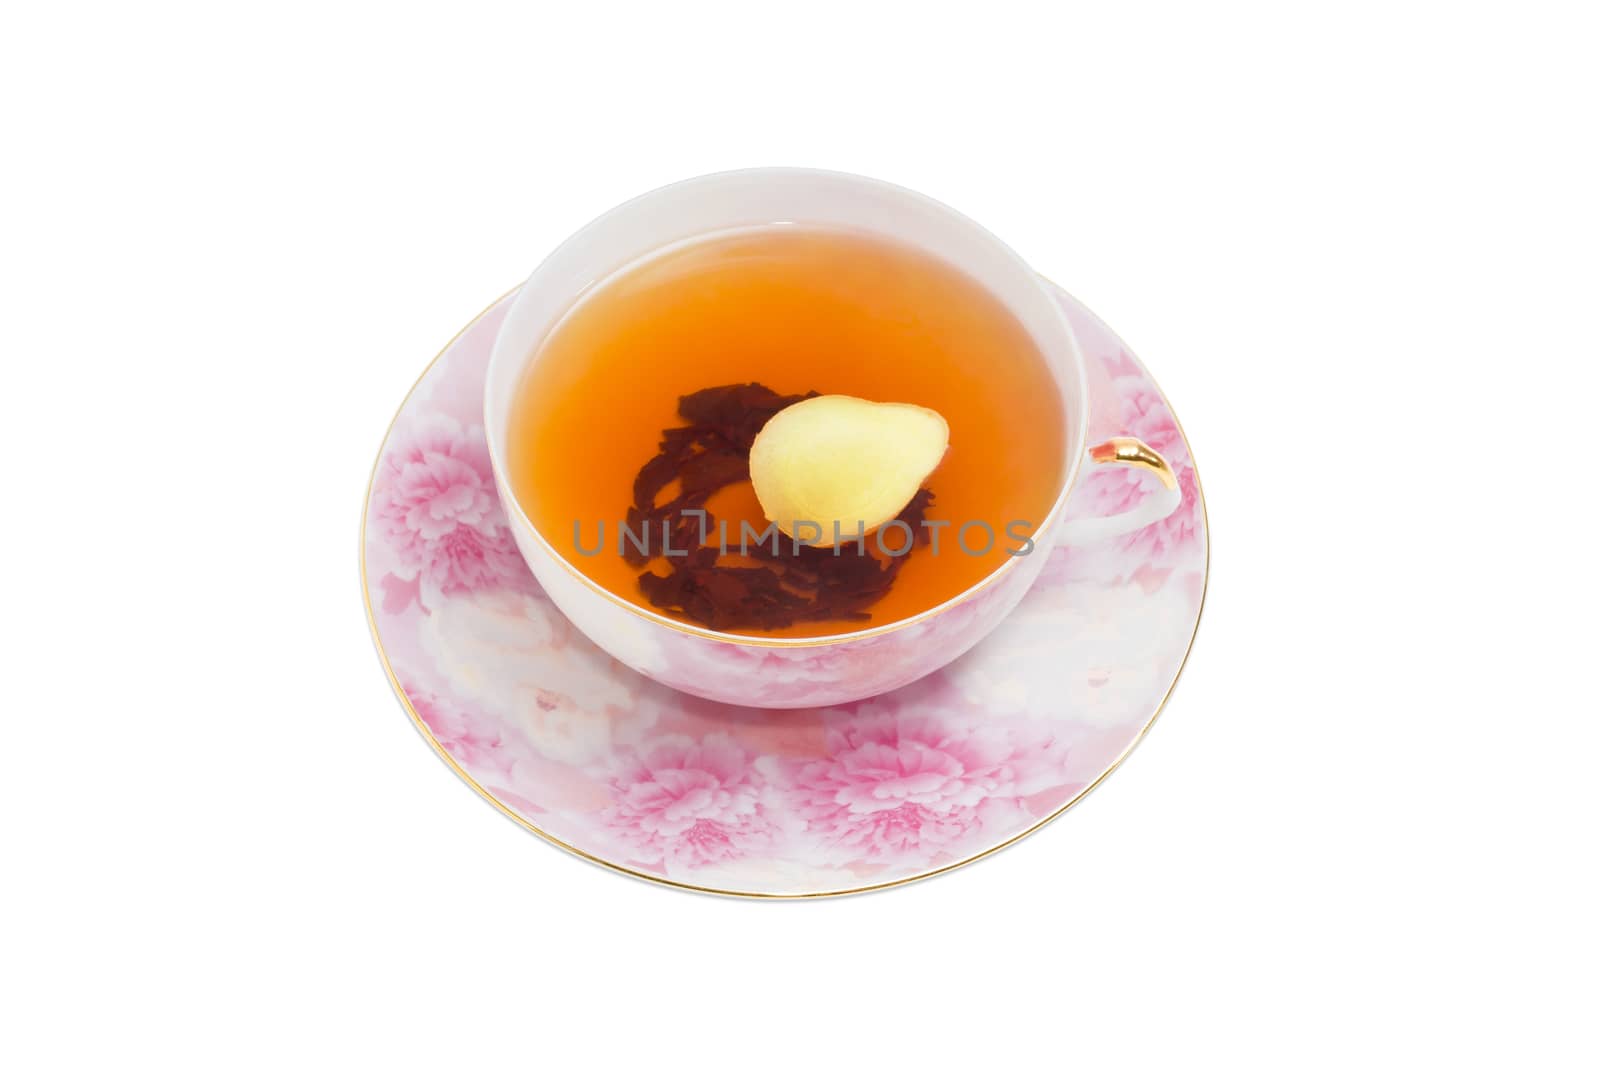 Ginger tea on a light background by anmbph